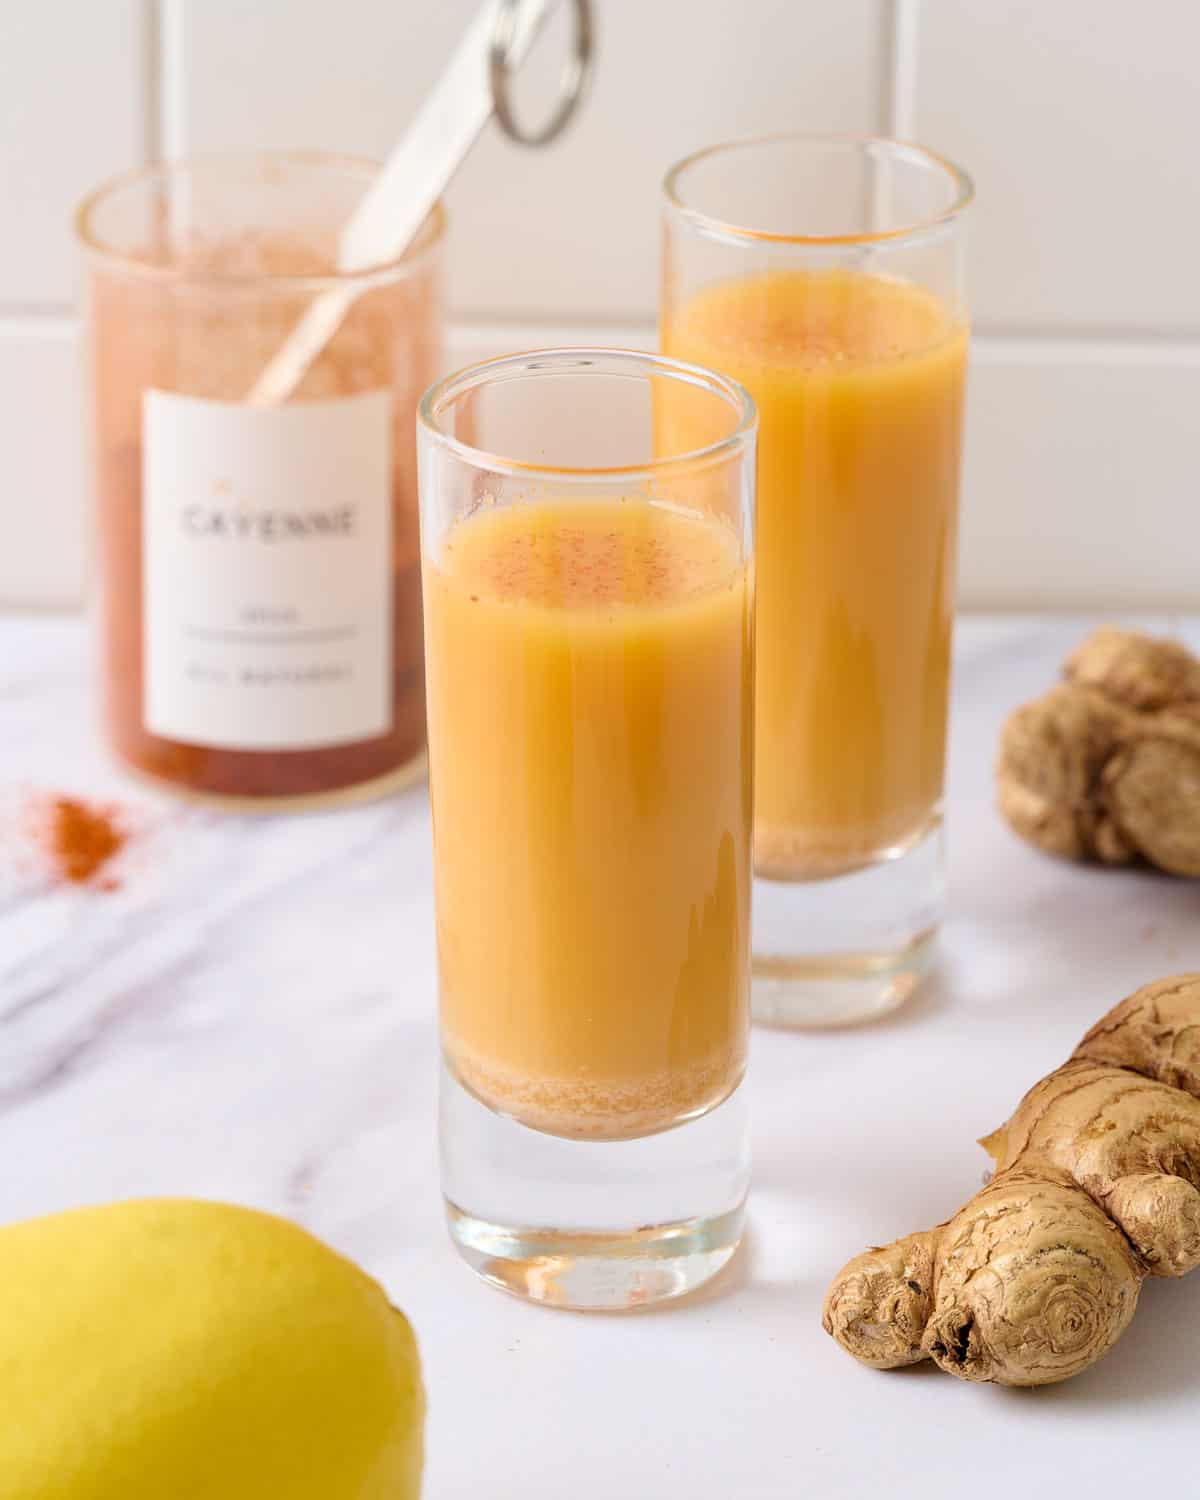 A close up image of two lemon ginger cayenne shots served in shot glasses.